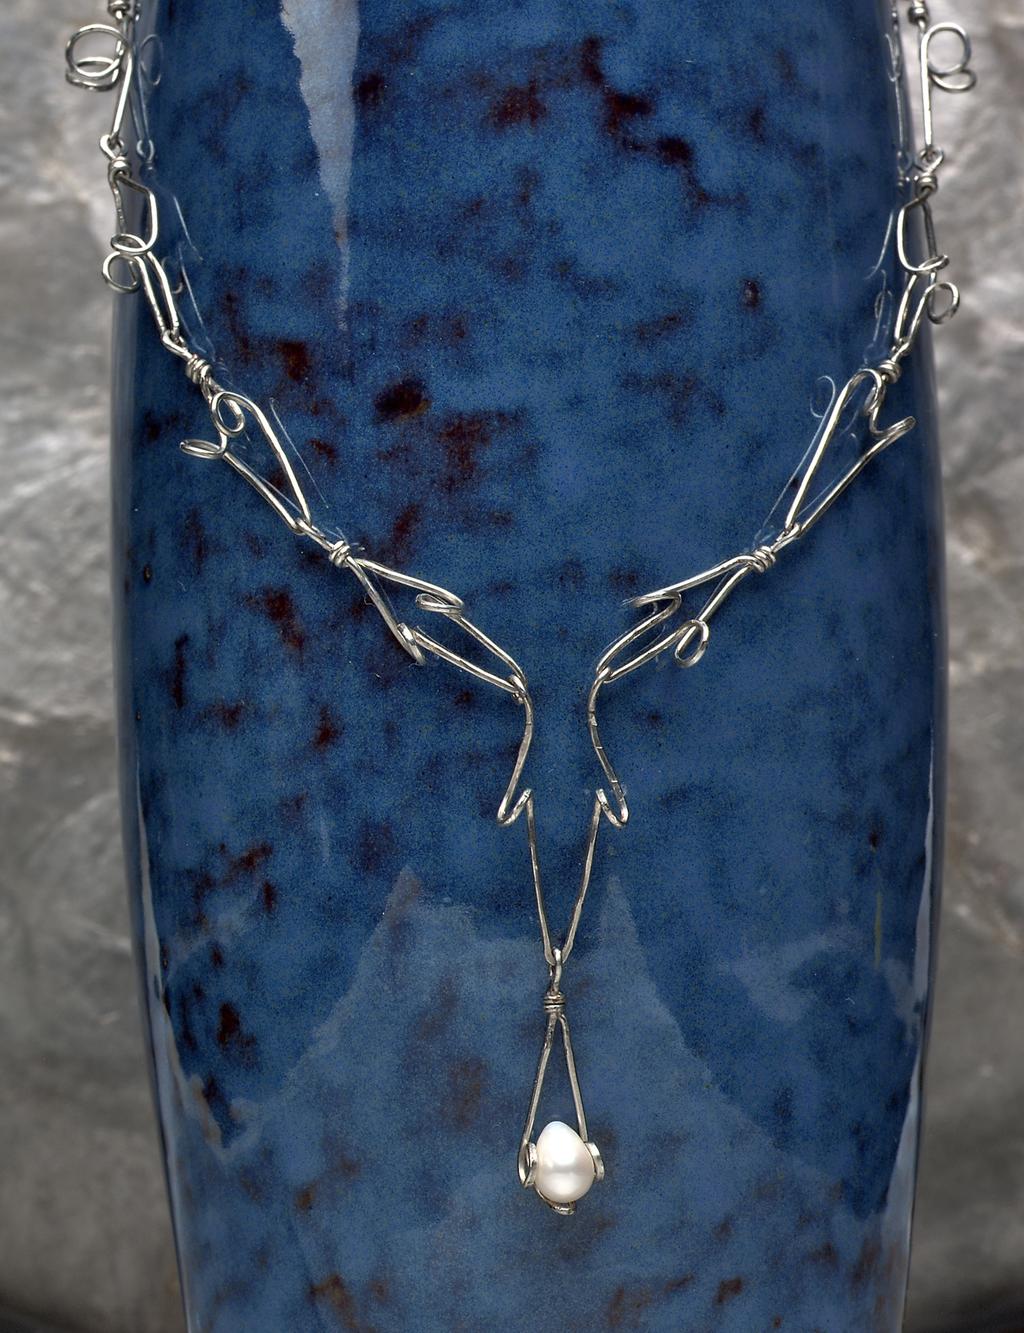 6 MAKE 1 NECKLACE Learn basic wire skills by Cynthia Wuller The links in